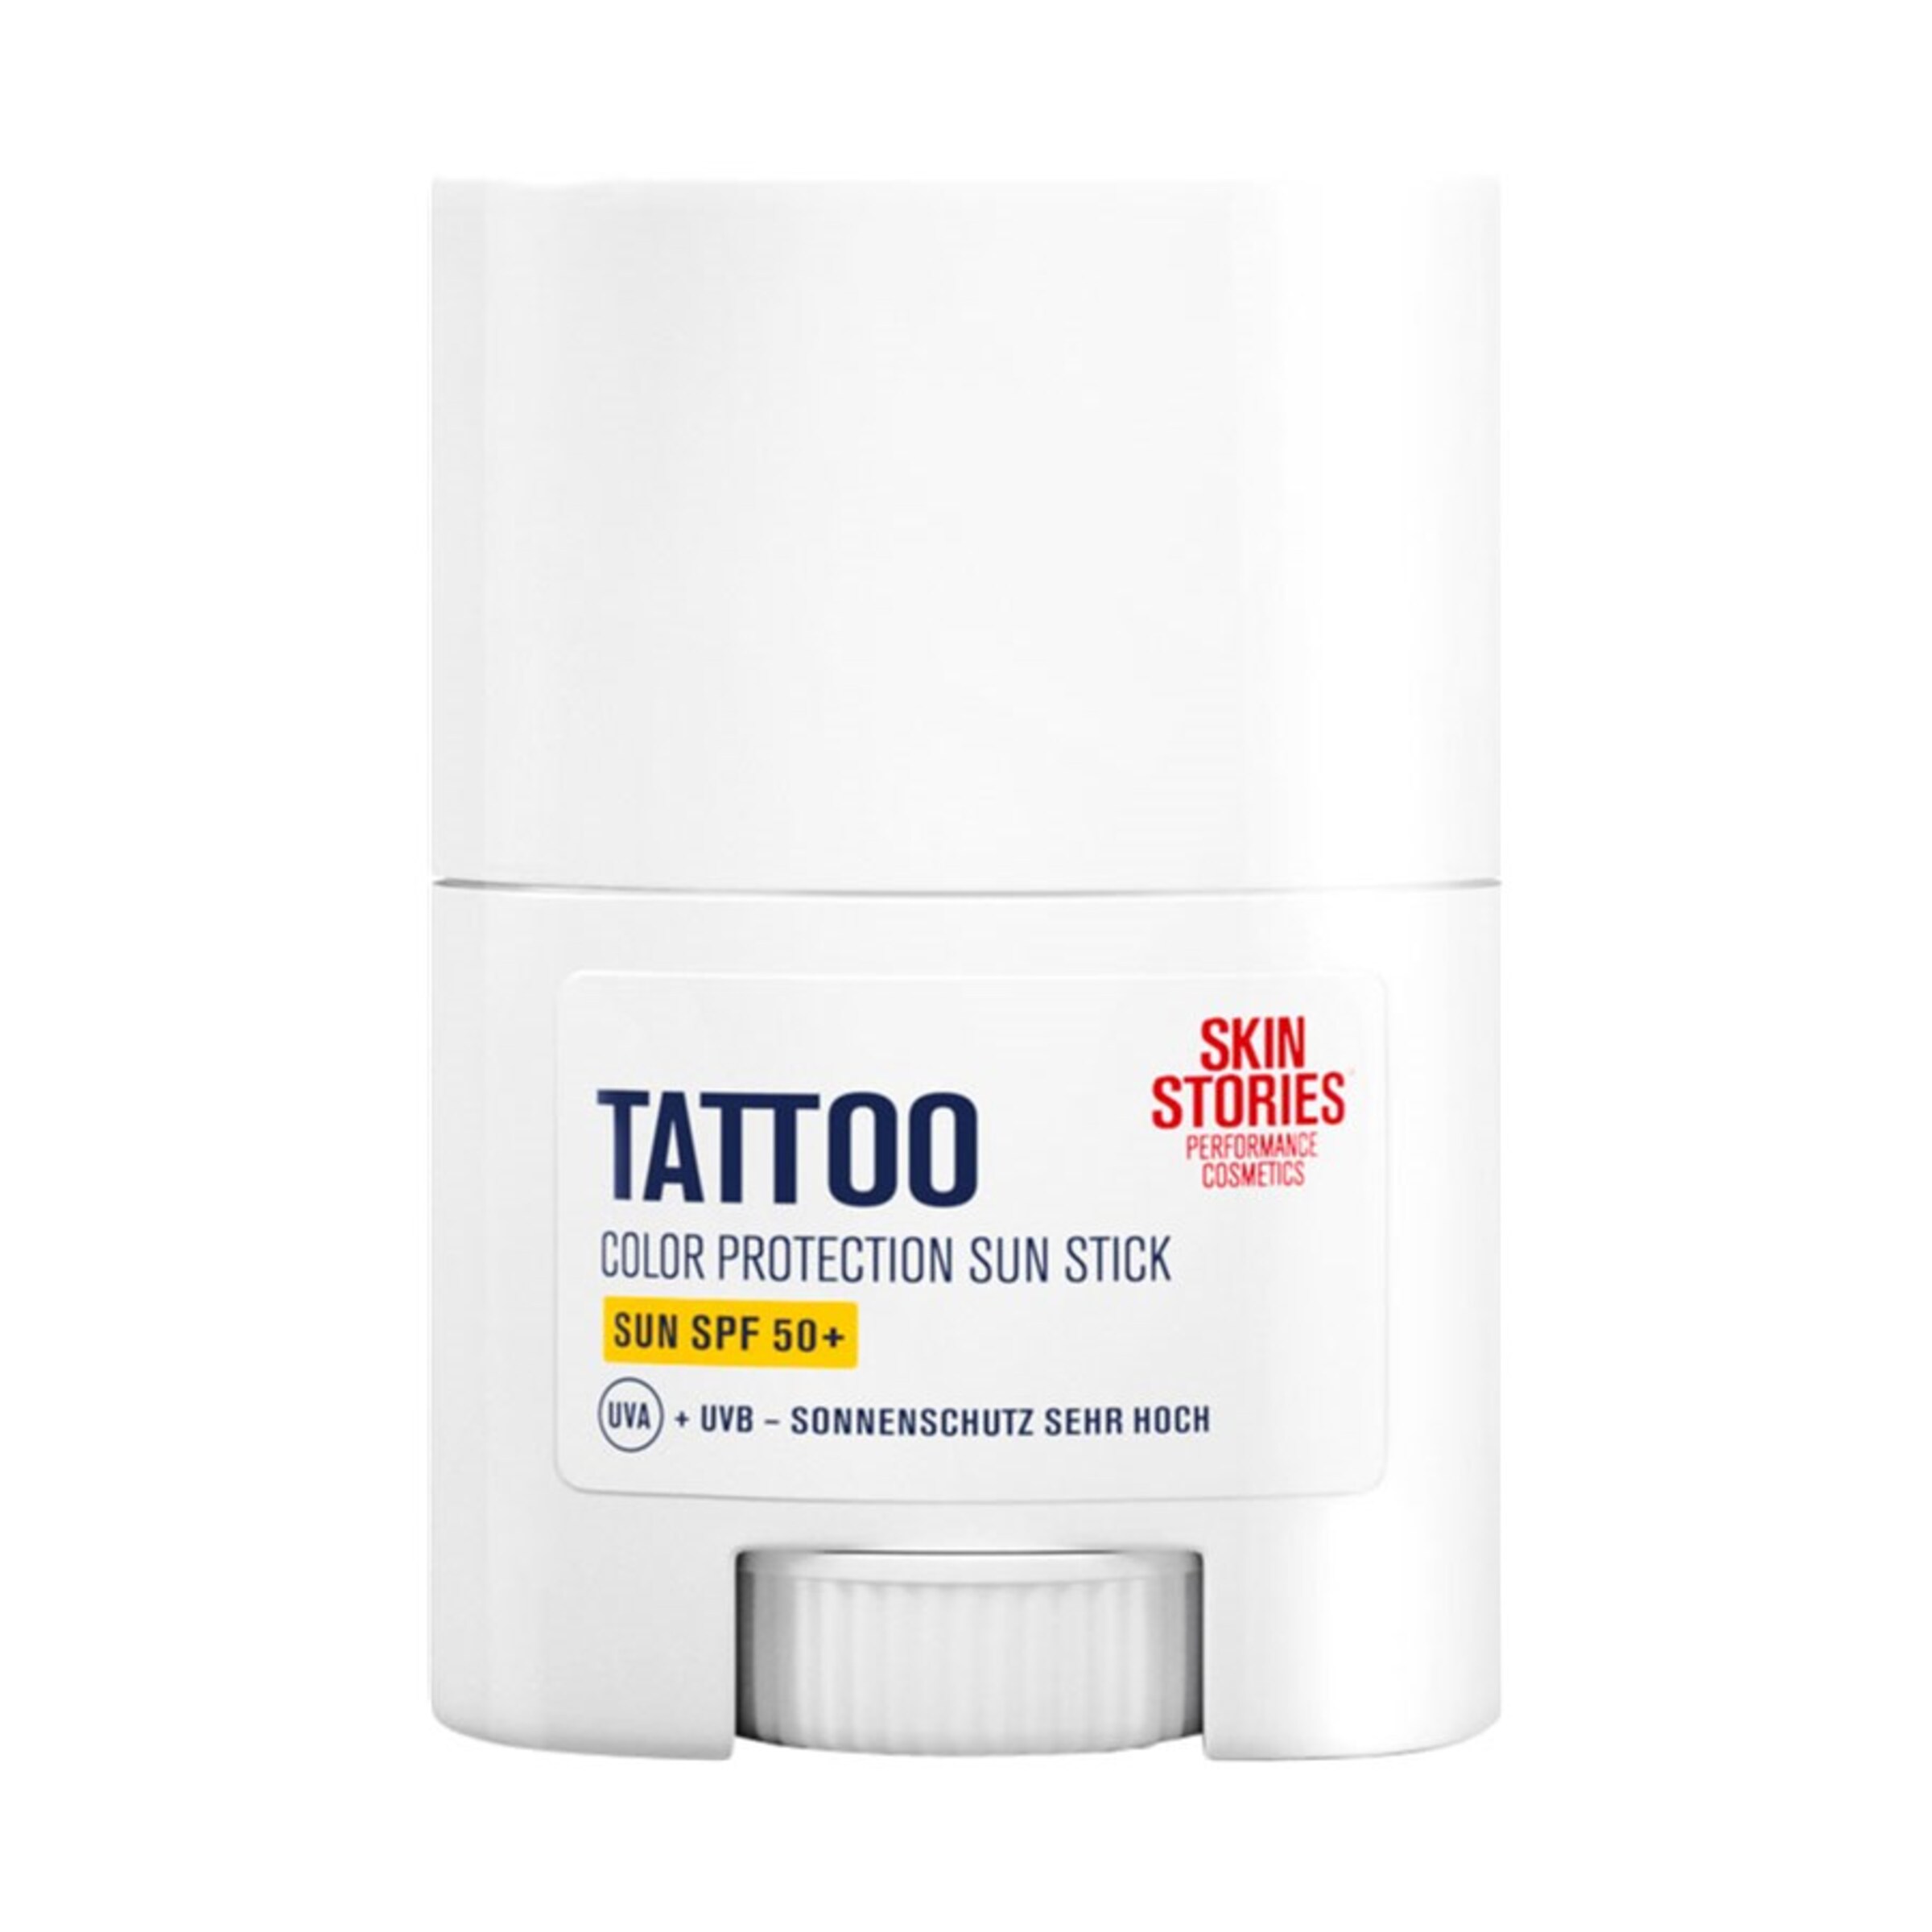 Skin Stories Sun Stick Tattoo Color Protection in 